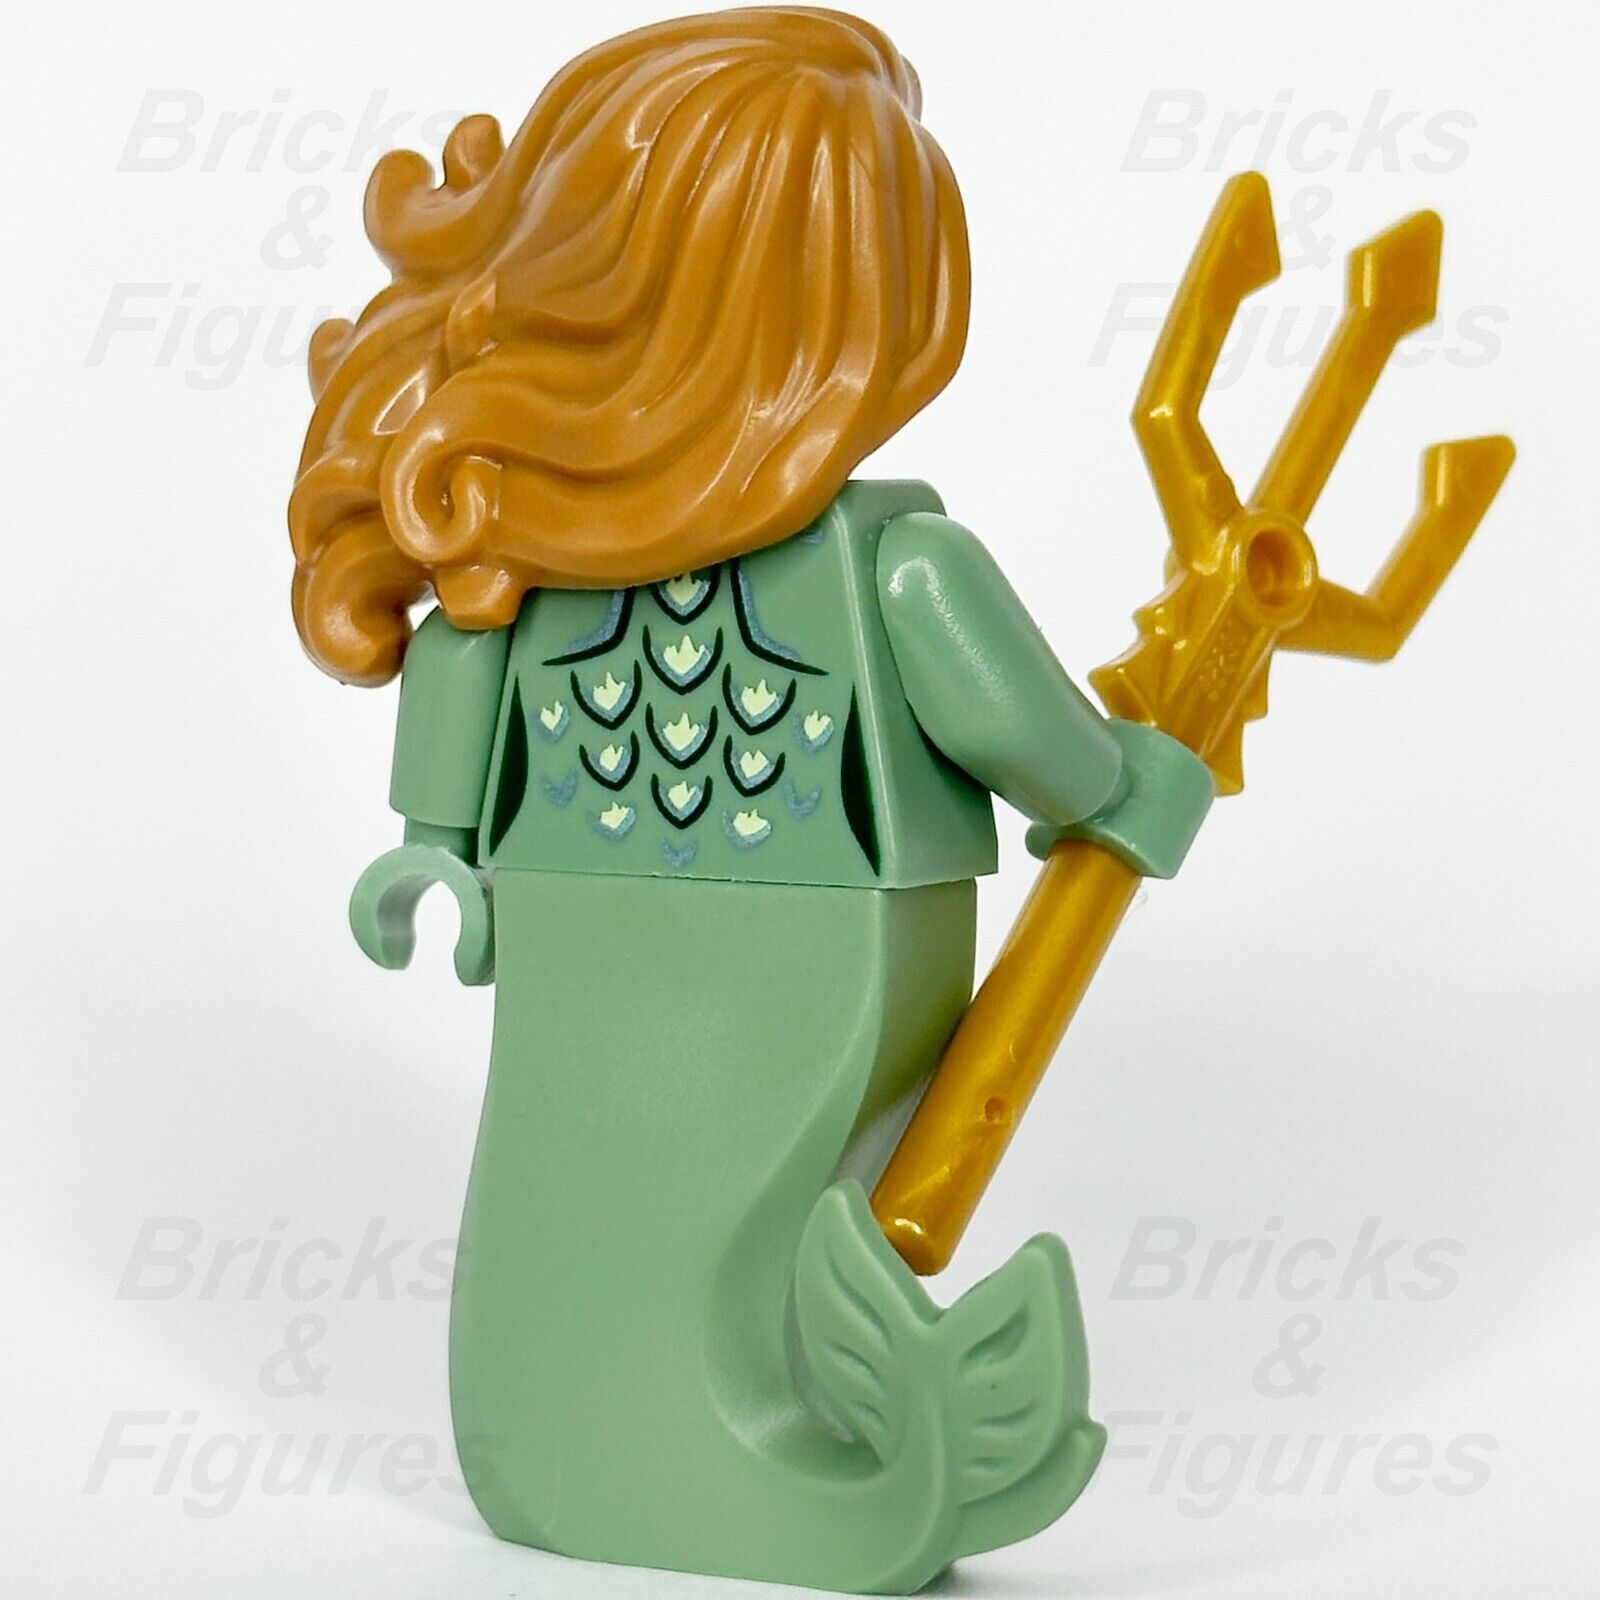 LEGO HARRY POTTER MERPERSON MINIFIGURE MERMAID MINIFIG GOBLET OF FIRE HP417 76420 04